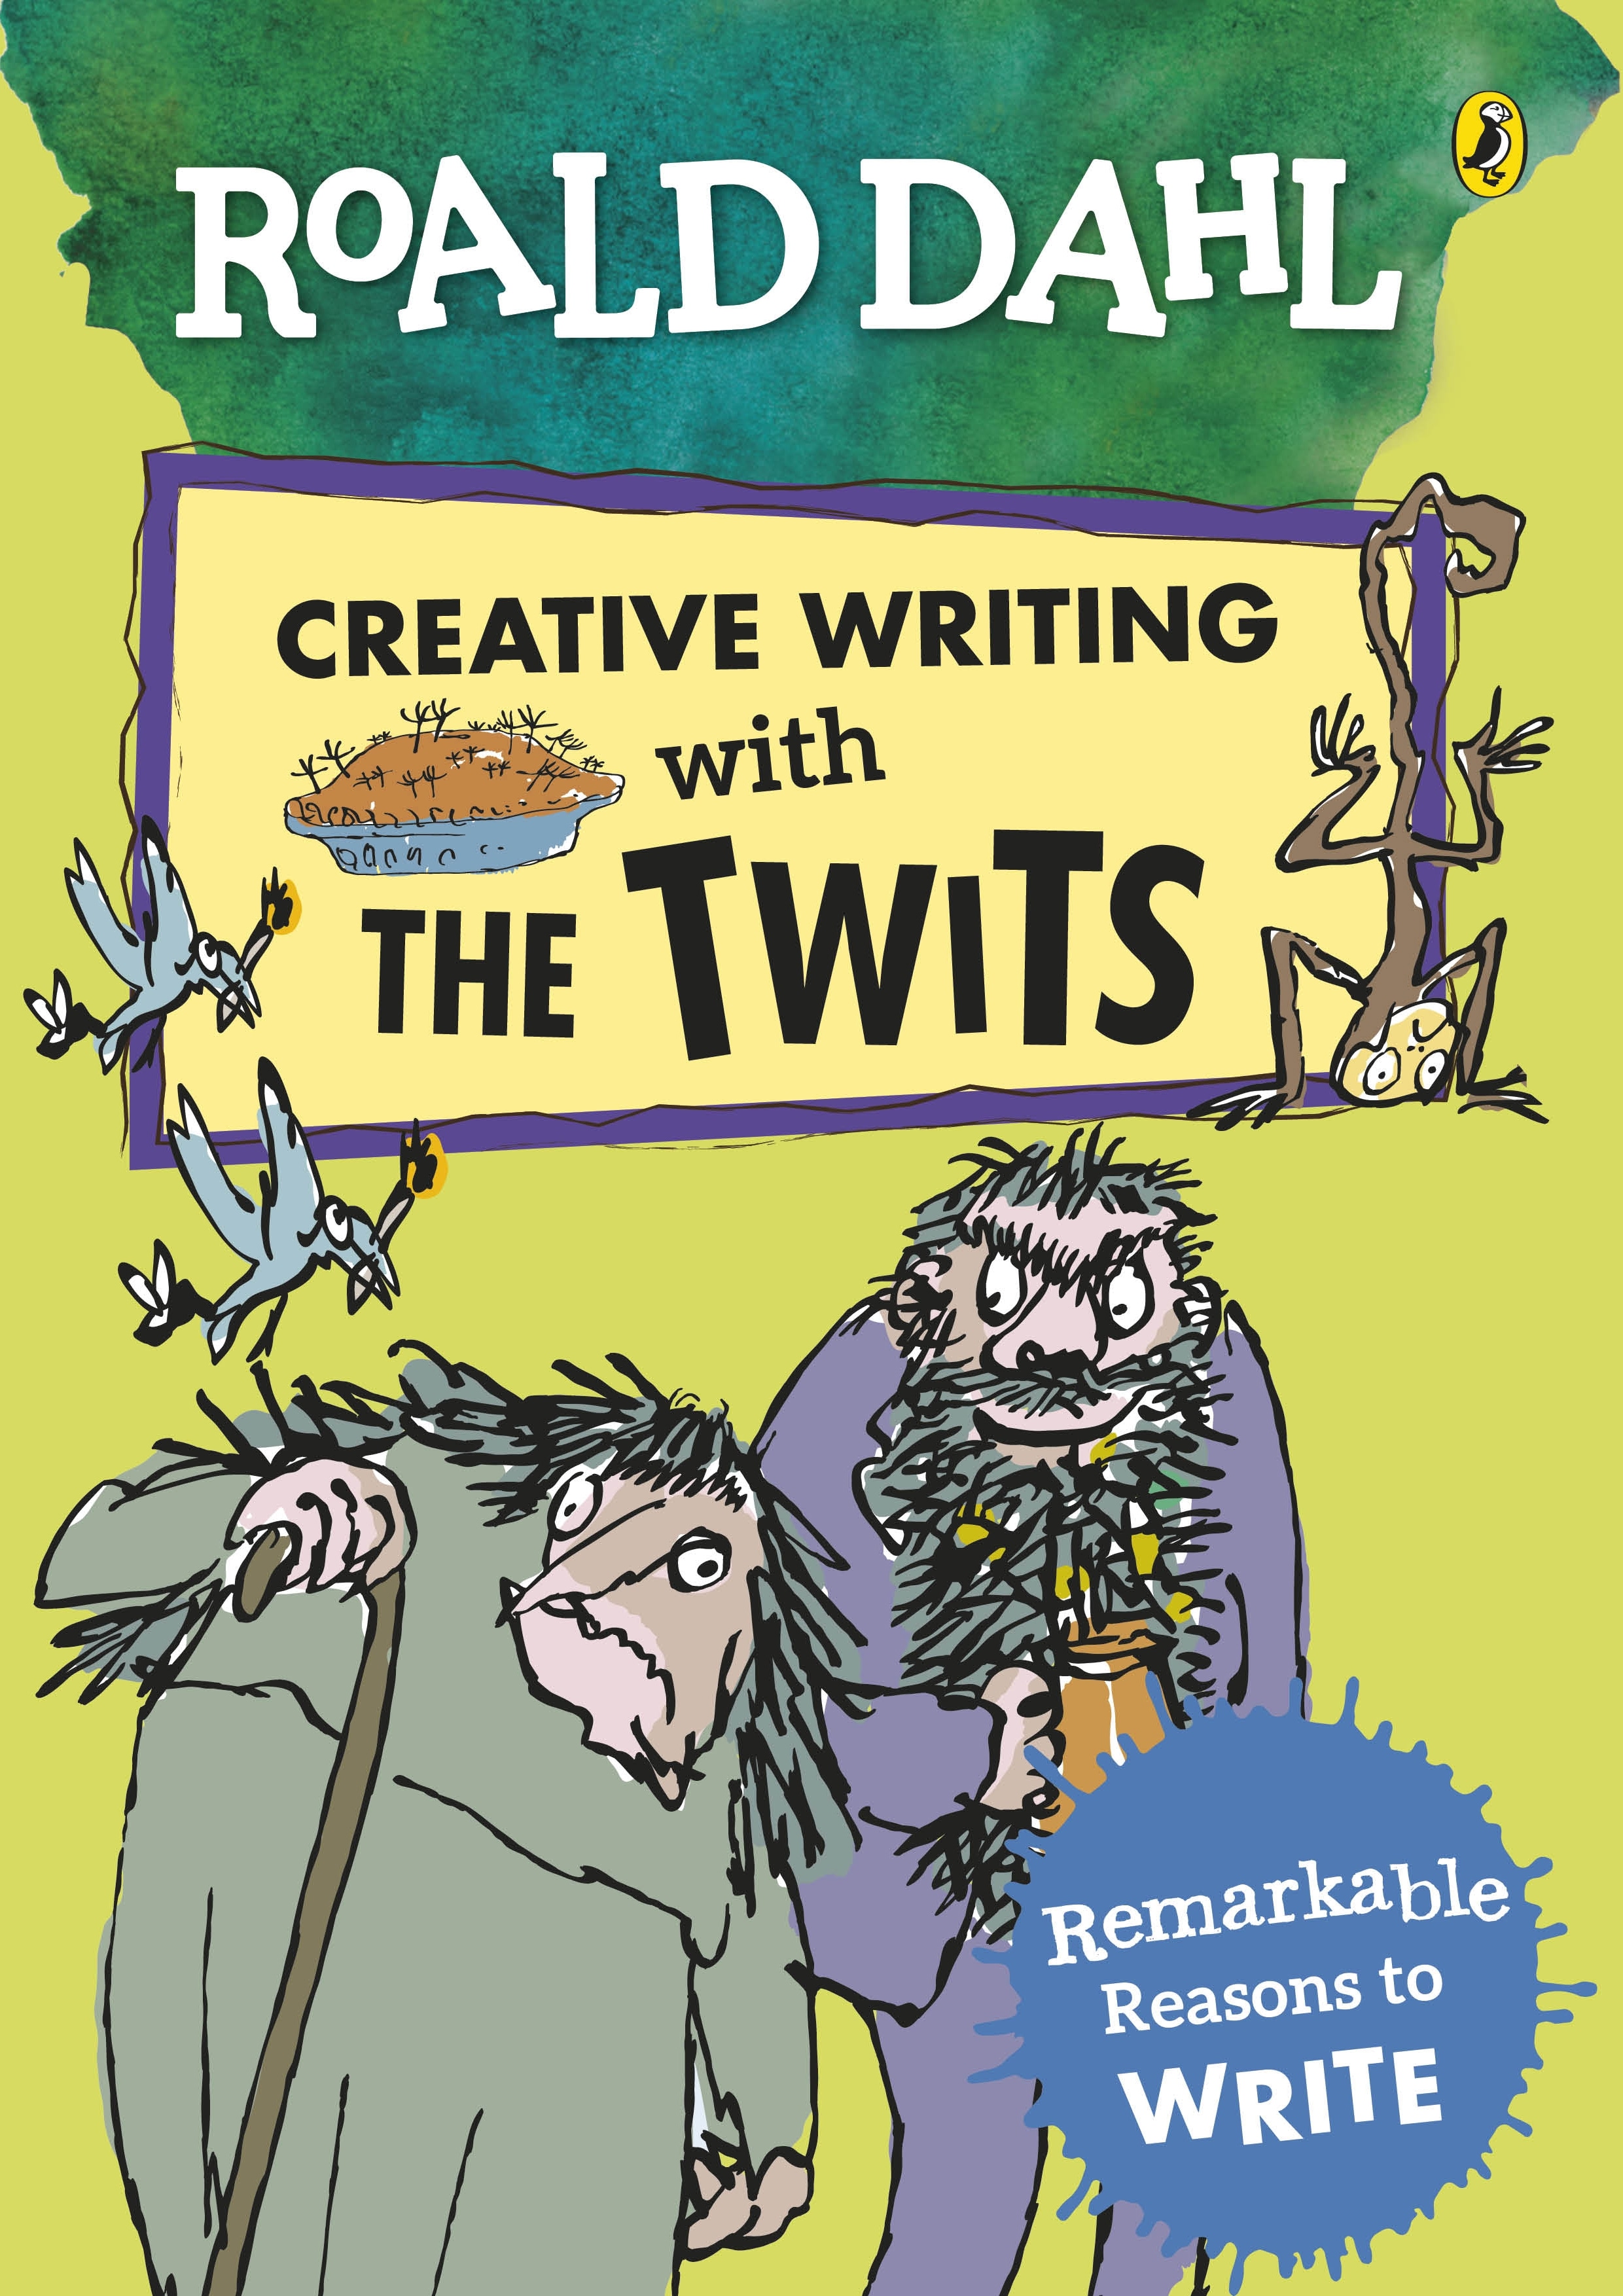 Book “Roald Dahl Creative Writing with The Twits: Remarkable Reasons to Write” by Roald Dahl — January 23, 2020